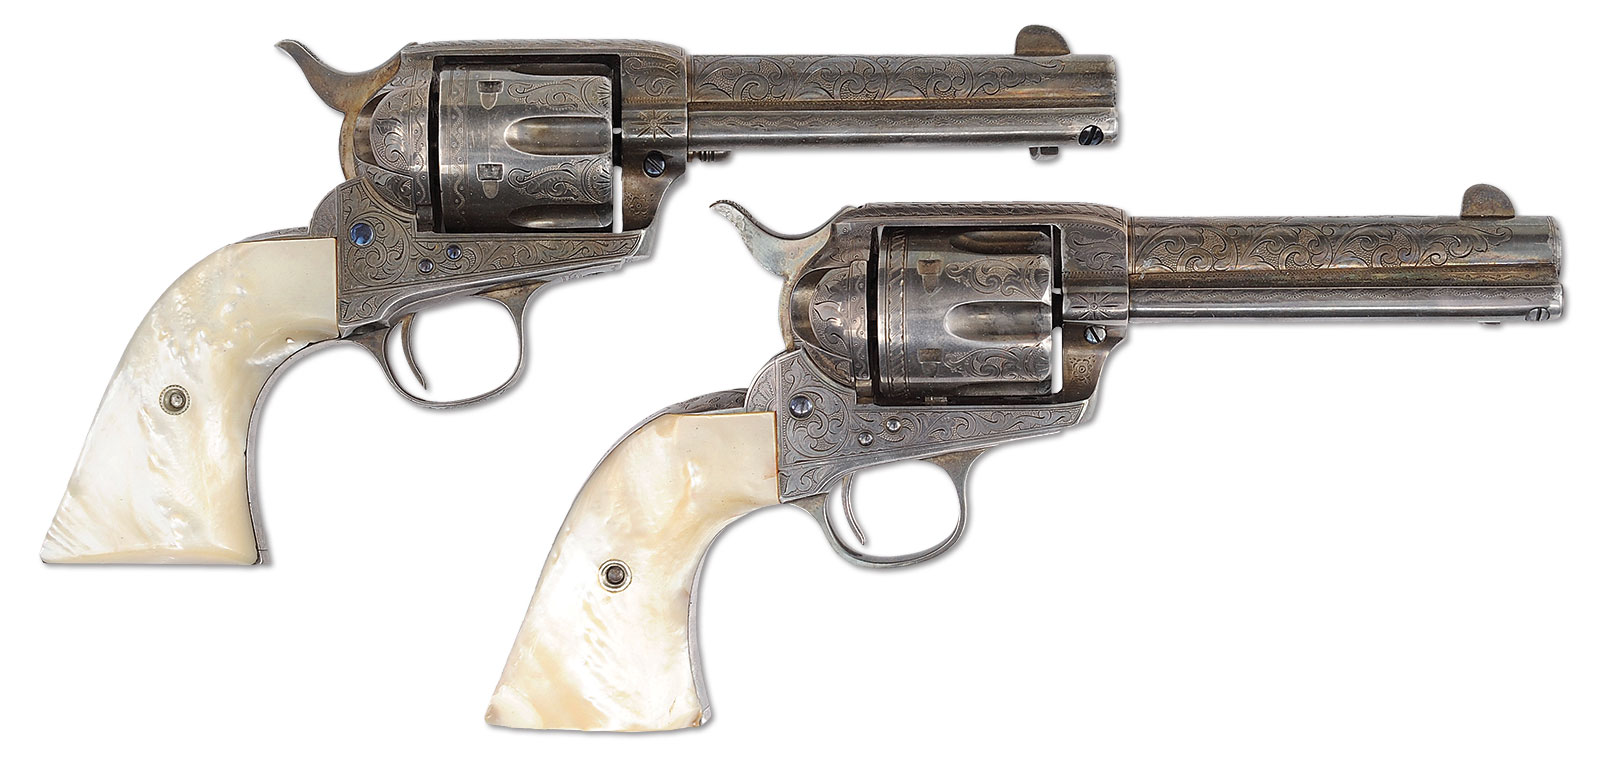 Pair of Engraved & Inscribed Silver Plated Colt Single Action Arm Revolvers, estimated at $150,000-225,000.